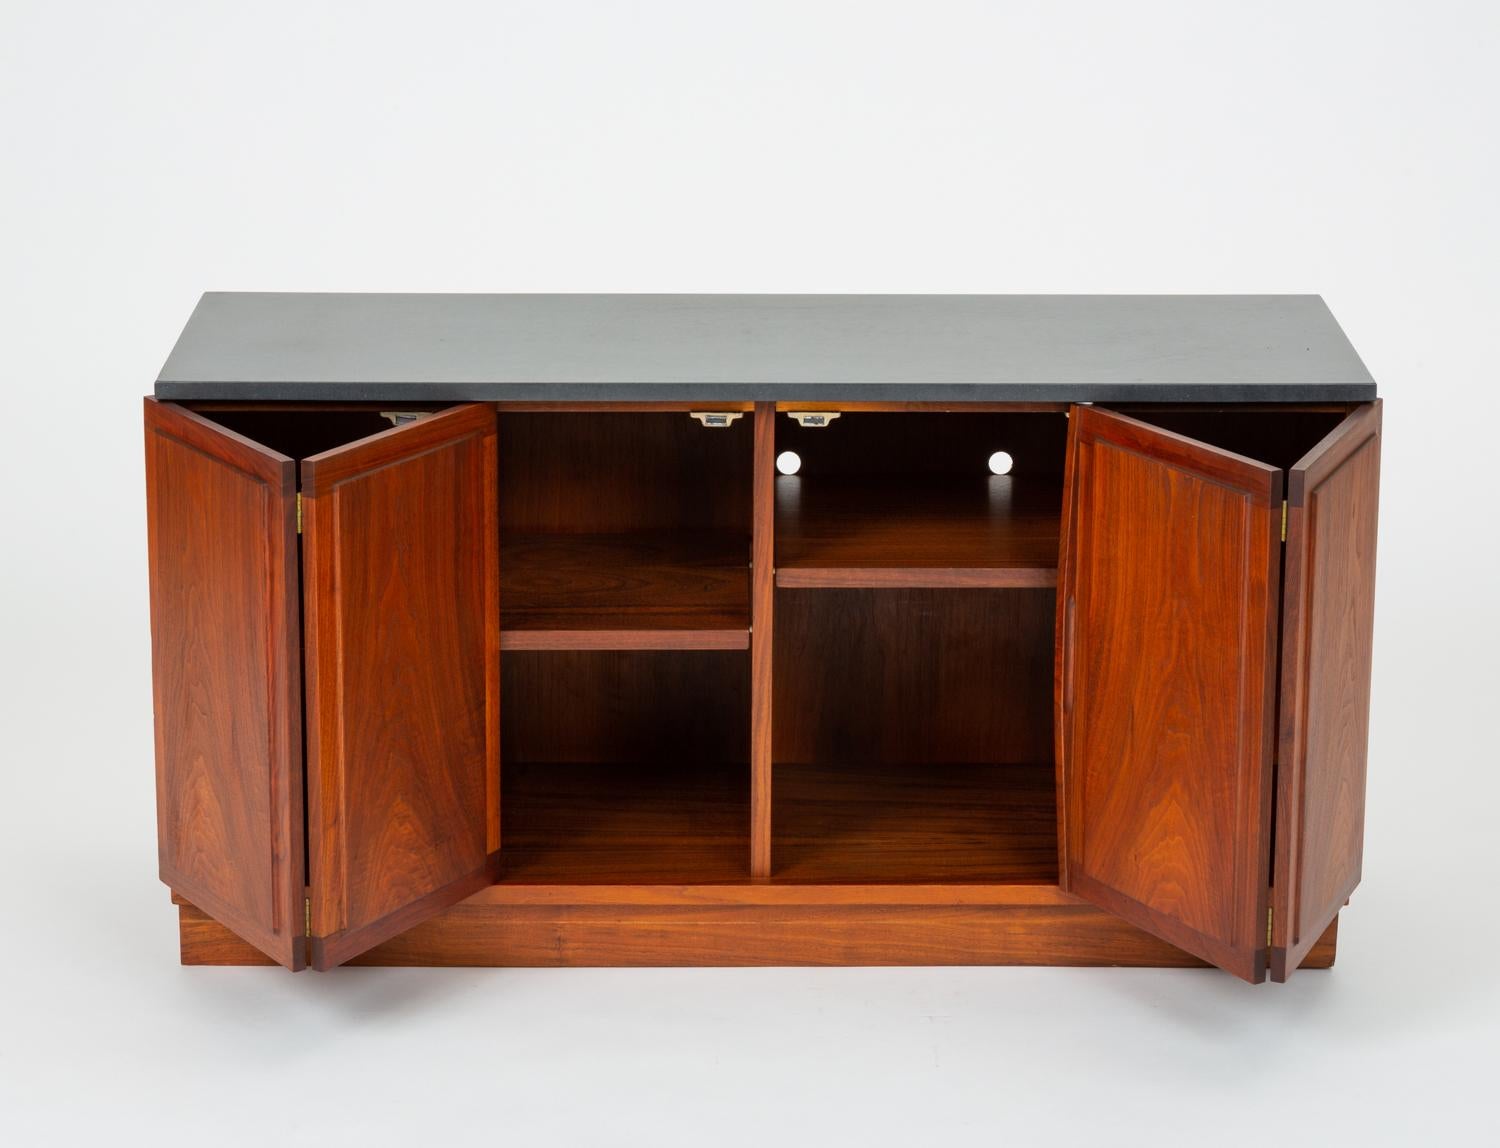 A walnut case piece from North Carolina-based Founders Furniture designed in the 1950s by Jack Cartwright. This small sideboard, known as the Half Cabinet, features beautifully figured walnut wood and slate top. Four panels make up two folding